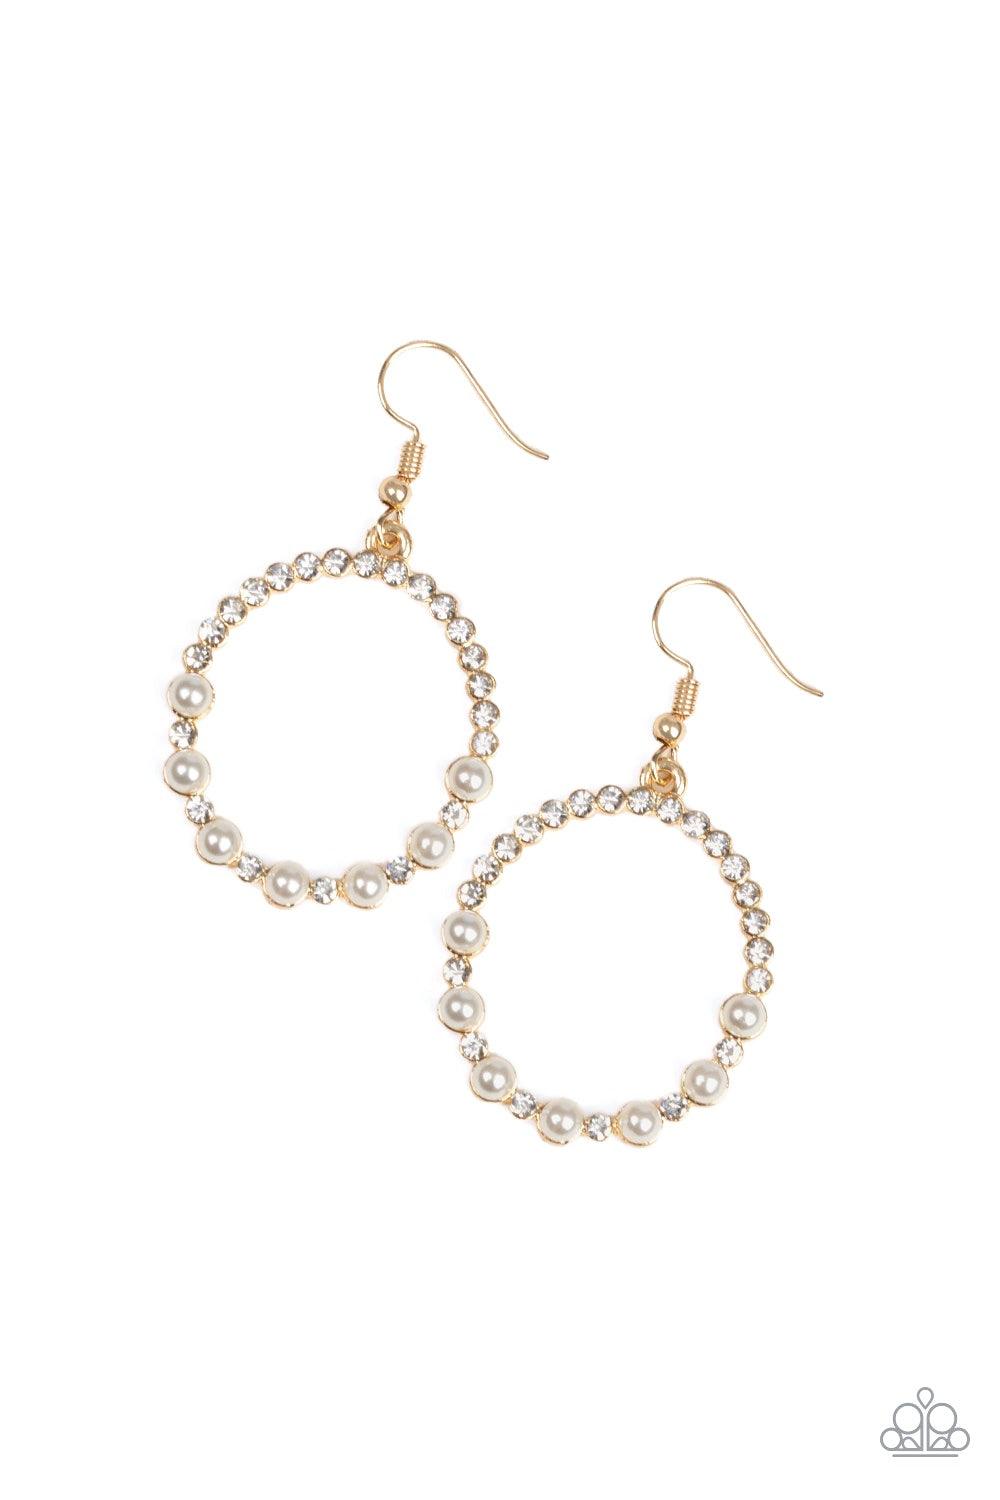 Paparazzi Accessories Glowing Grandeur - Gold Encrusted in glassy white rhinestones, the bottom of a glistening gold hoop is dotted in bubbly white pearls for a refined fashion. Earring attaches to a standard fishhook fitting. Jewelry